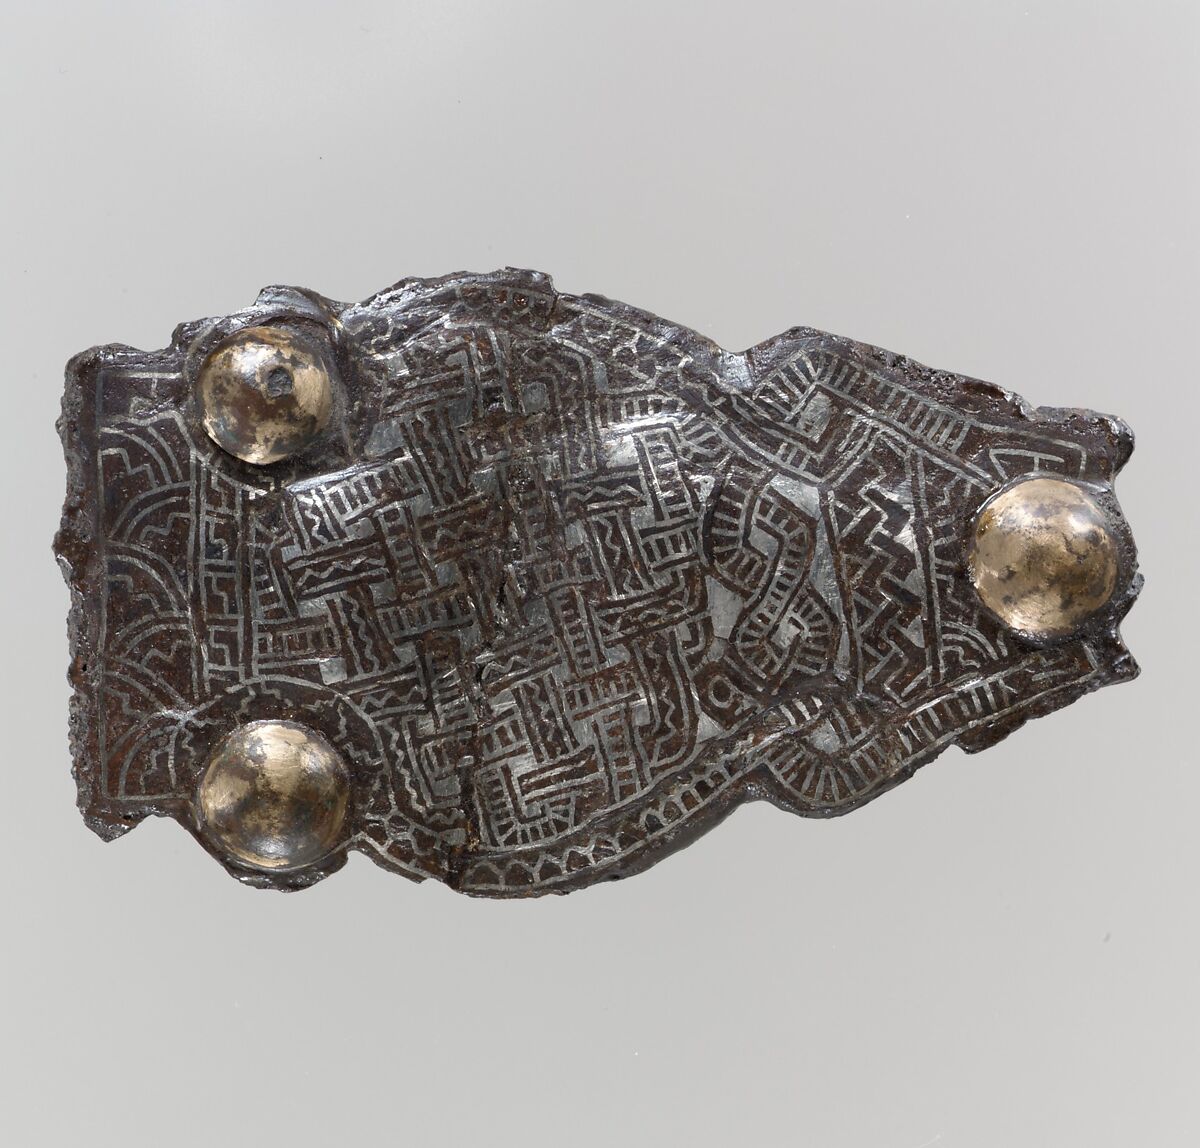 Counter Plate from a Belt Buckle, Iron with silver inlay and copper alloy rivets, Frankish 